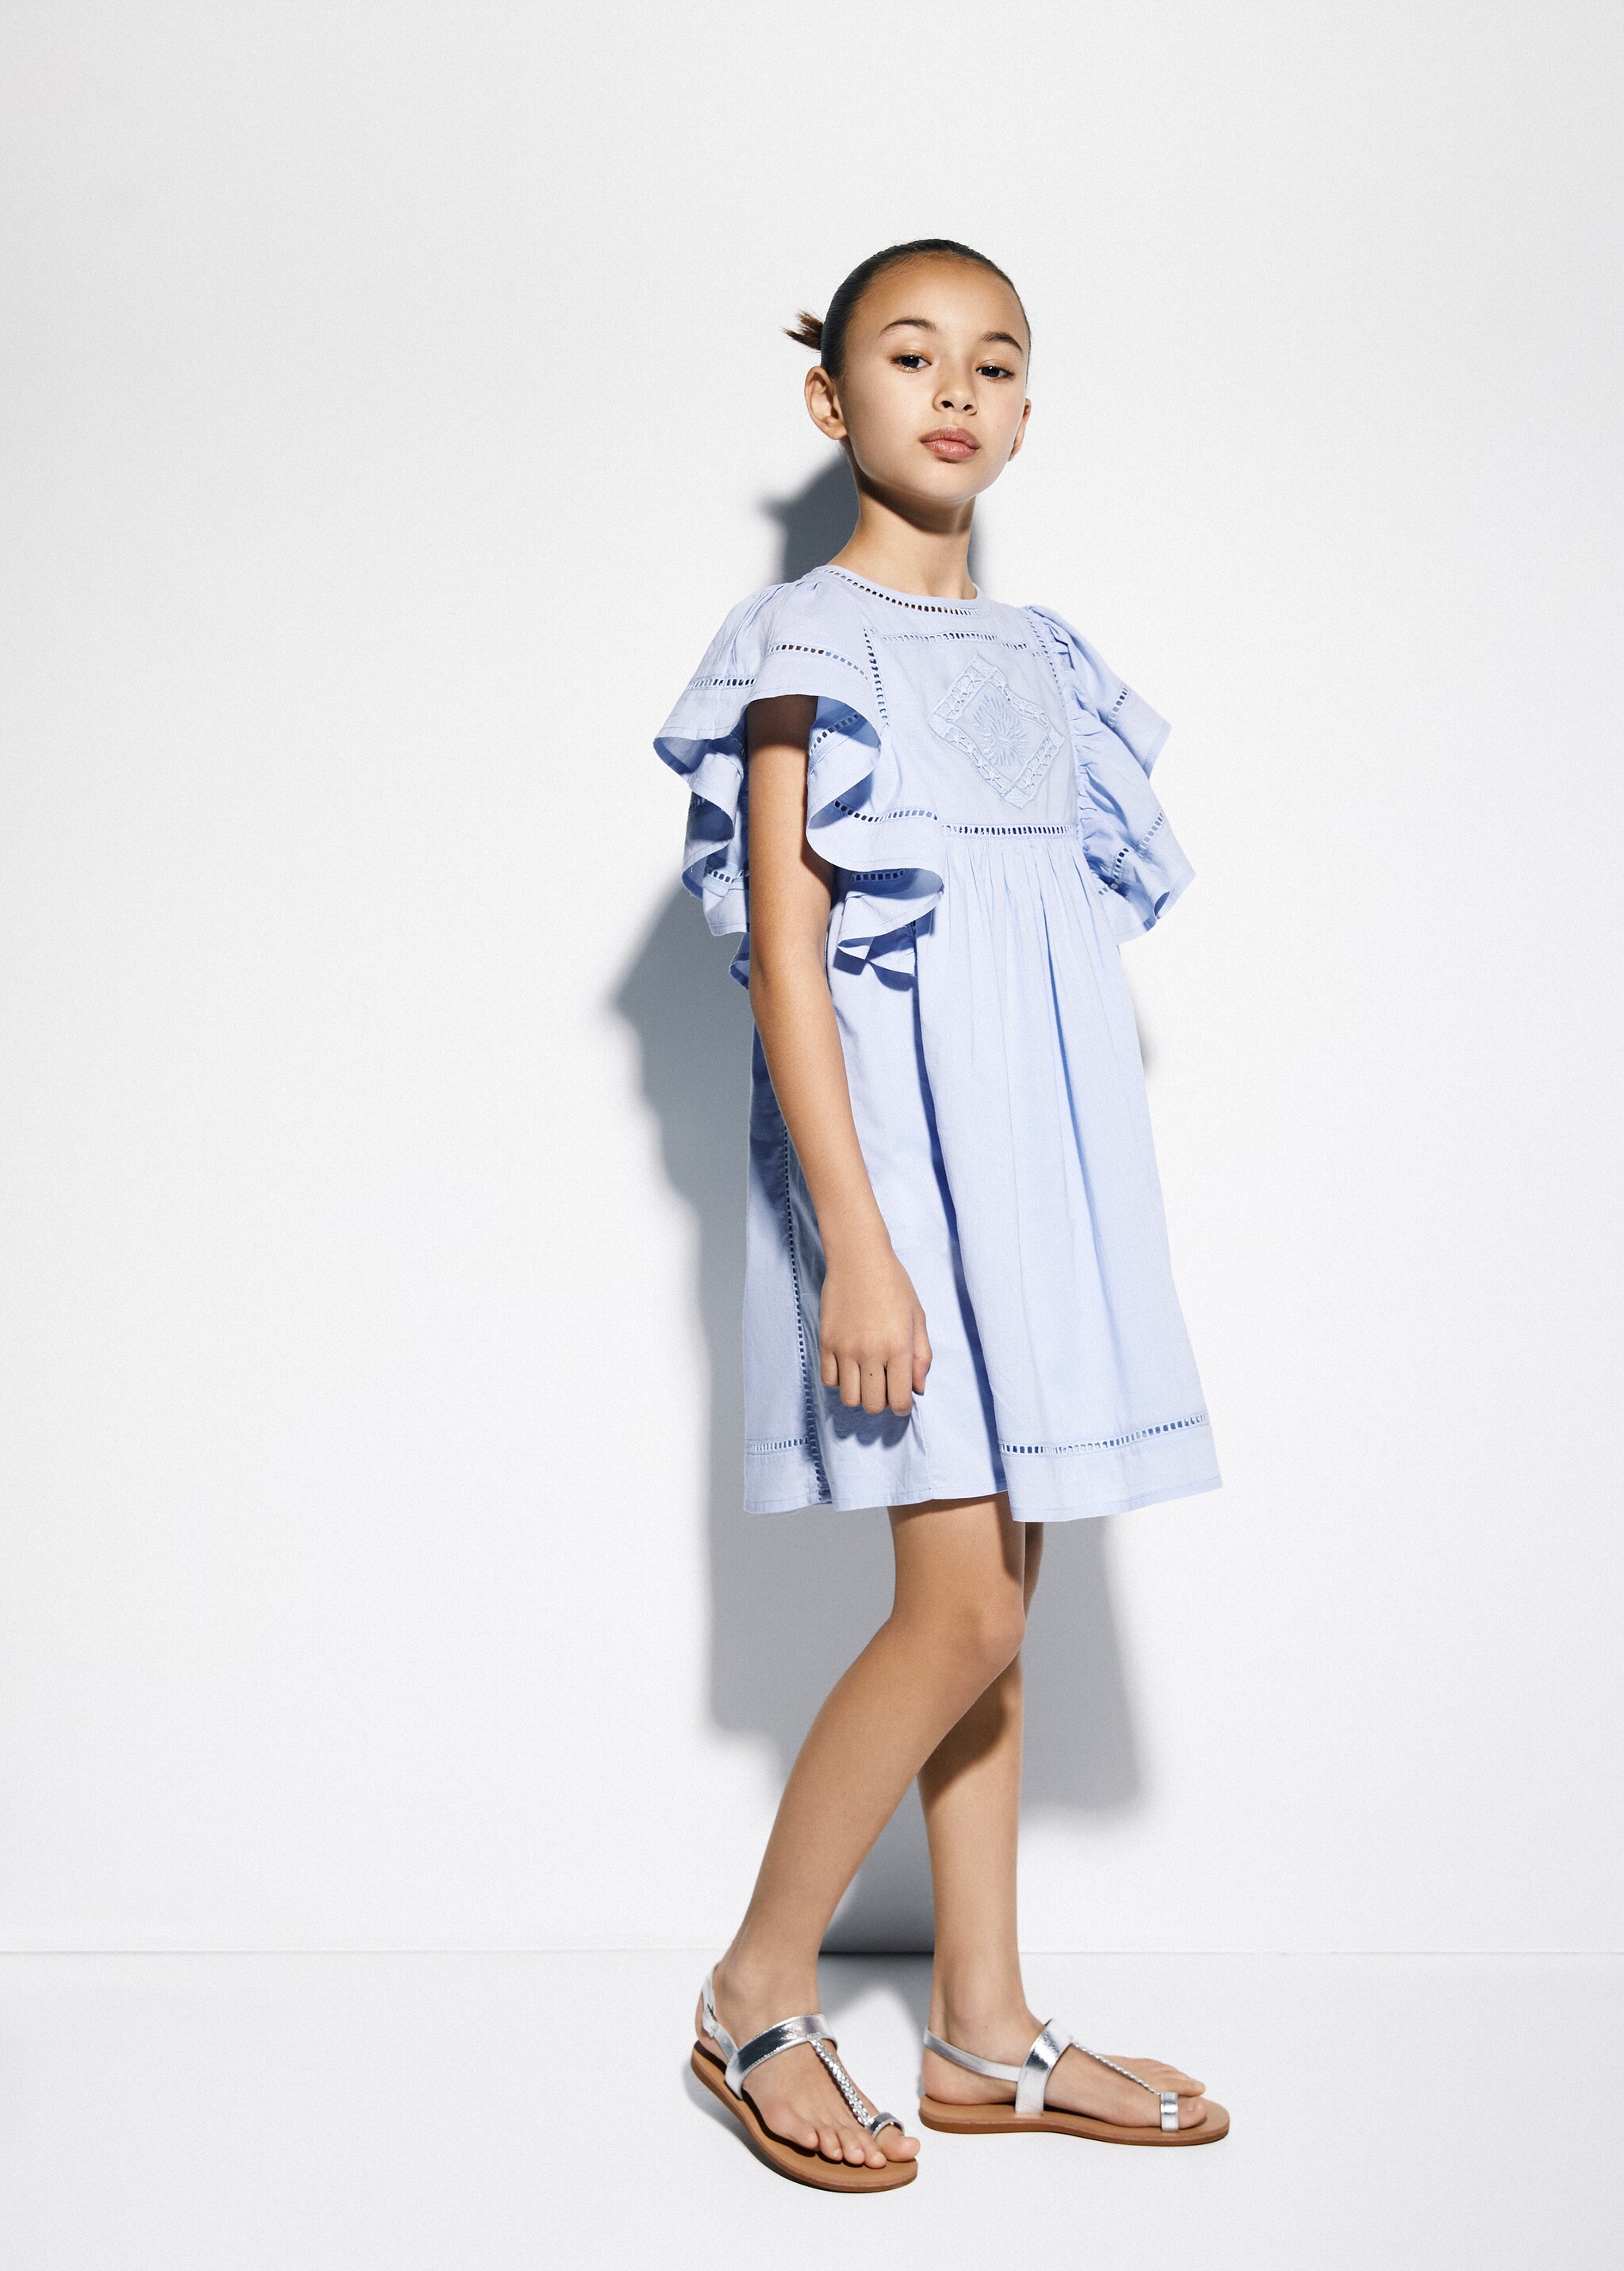 Broderie anglaise Ruffled dress - General plane